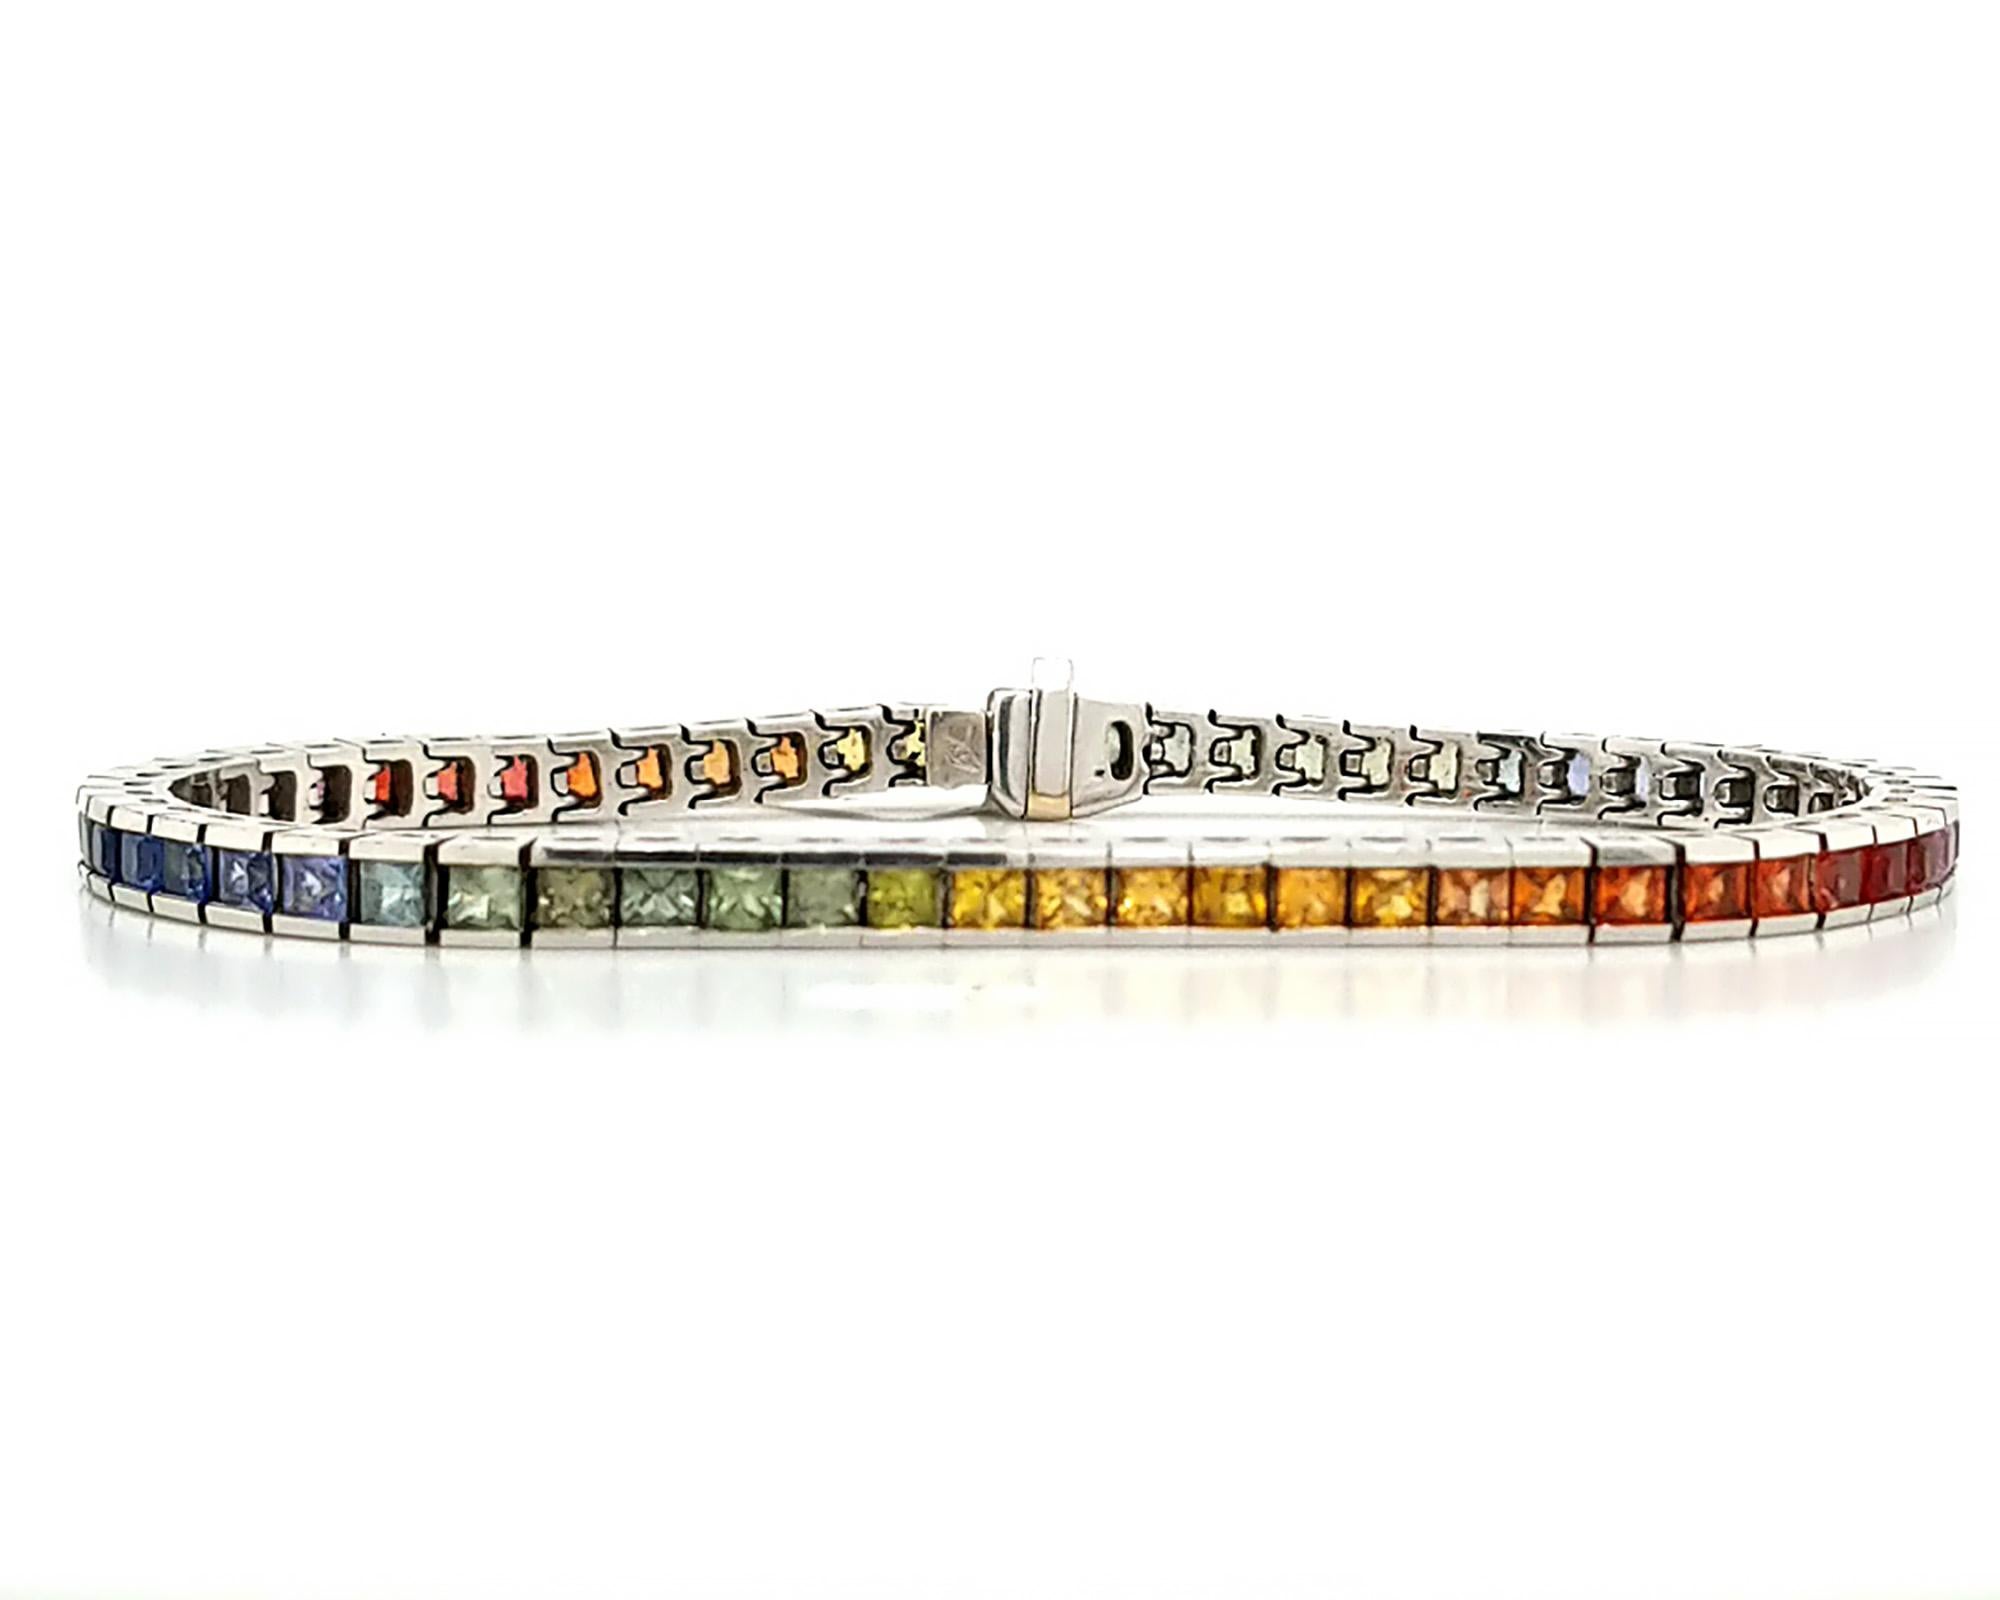 A beautiful tennis bracelet embellished with multi-colored princess-cut sapphires. Total weight of sapphires is 9.47 carats.
Made in 18K white gold weighing 20.90 grams.
Length of bracelet is 7 1/3 inches (18.7 cm).